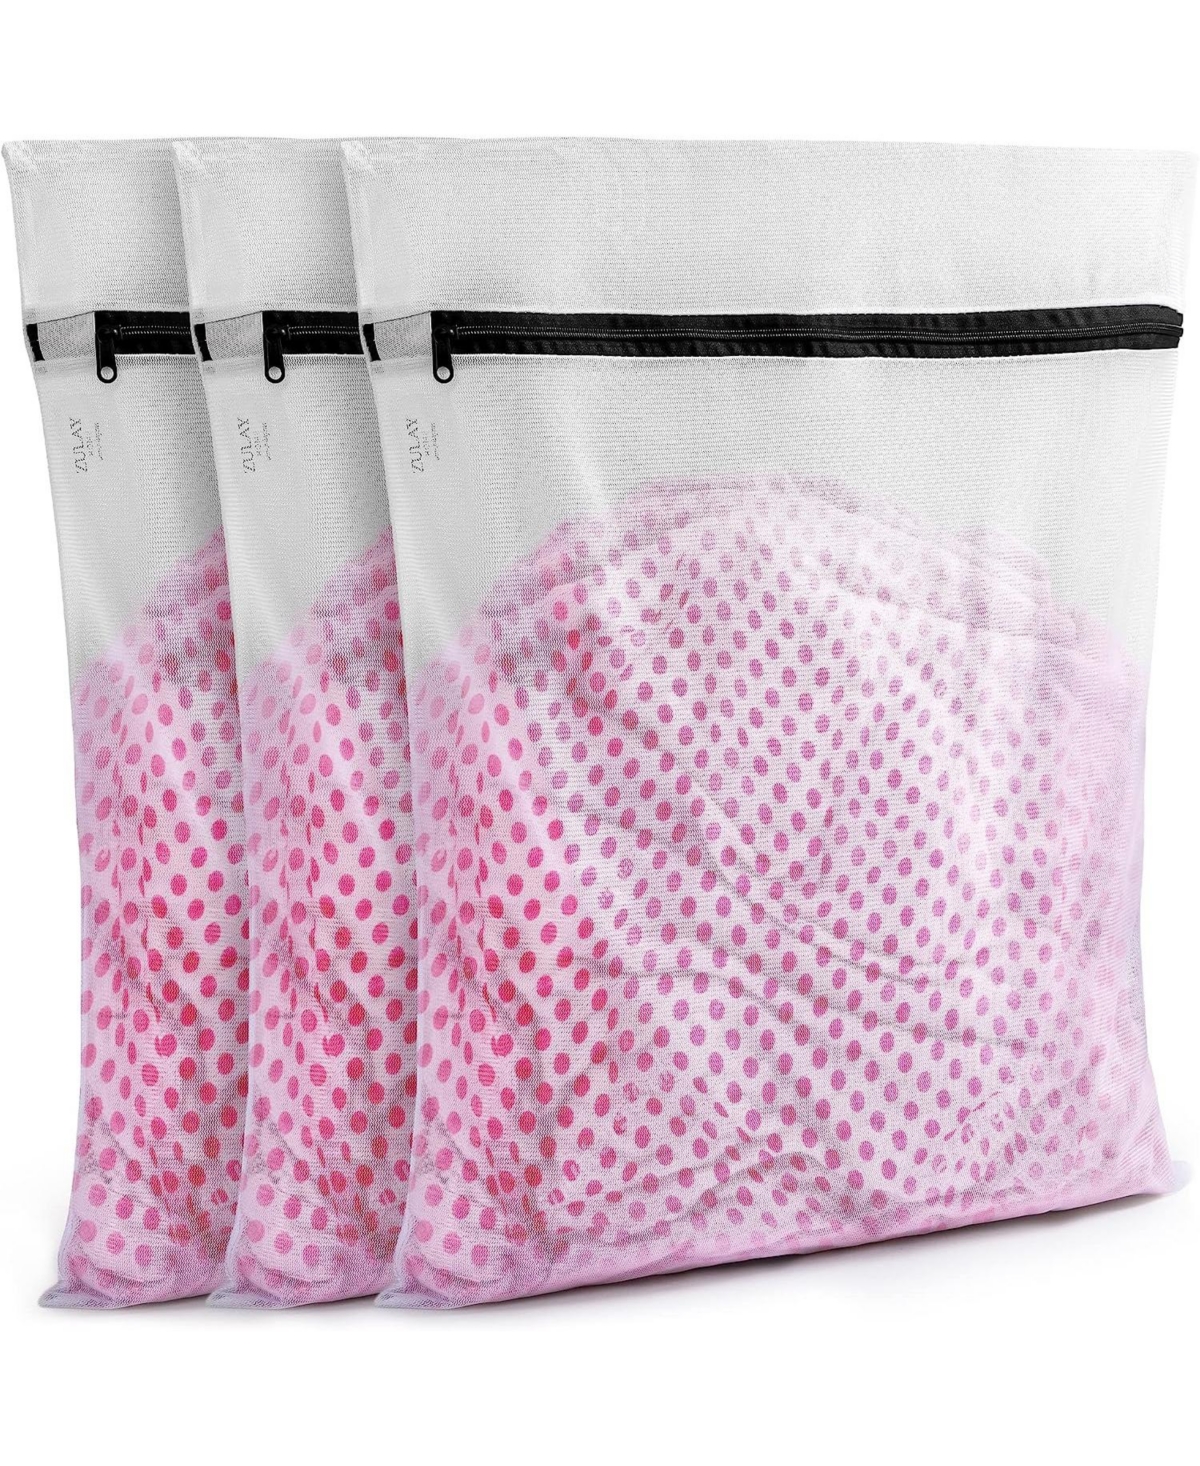 Large Reusable 3 pack Mesh Laundry Bags for Delicates and Washing Machine - Black